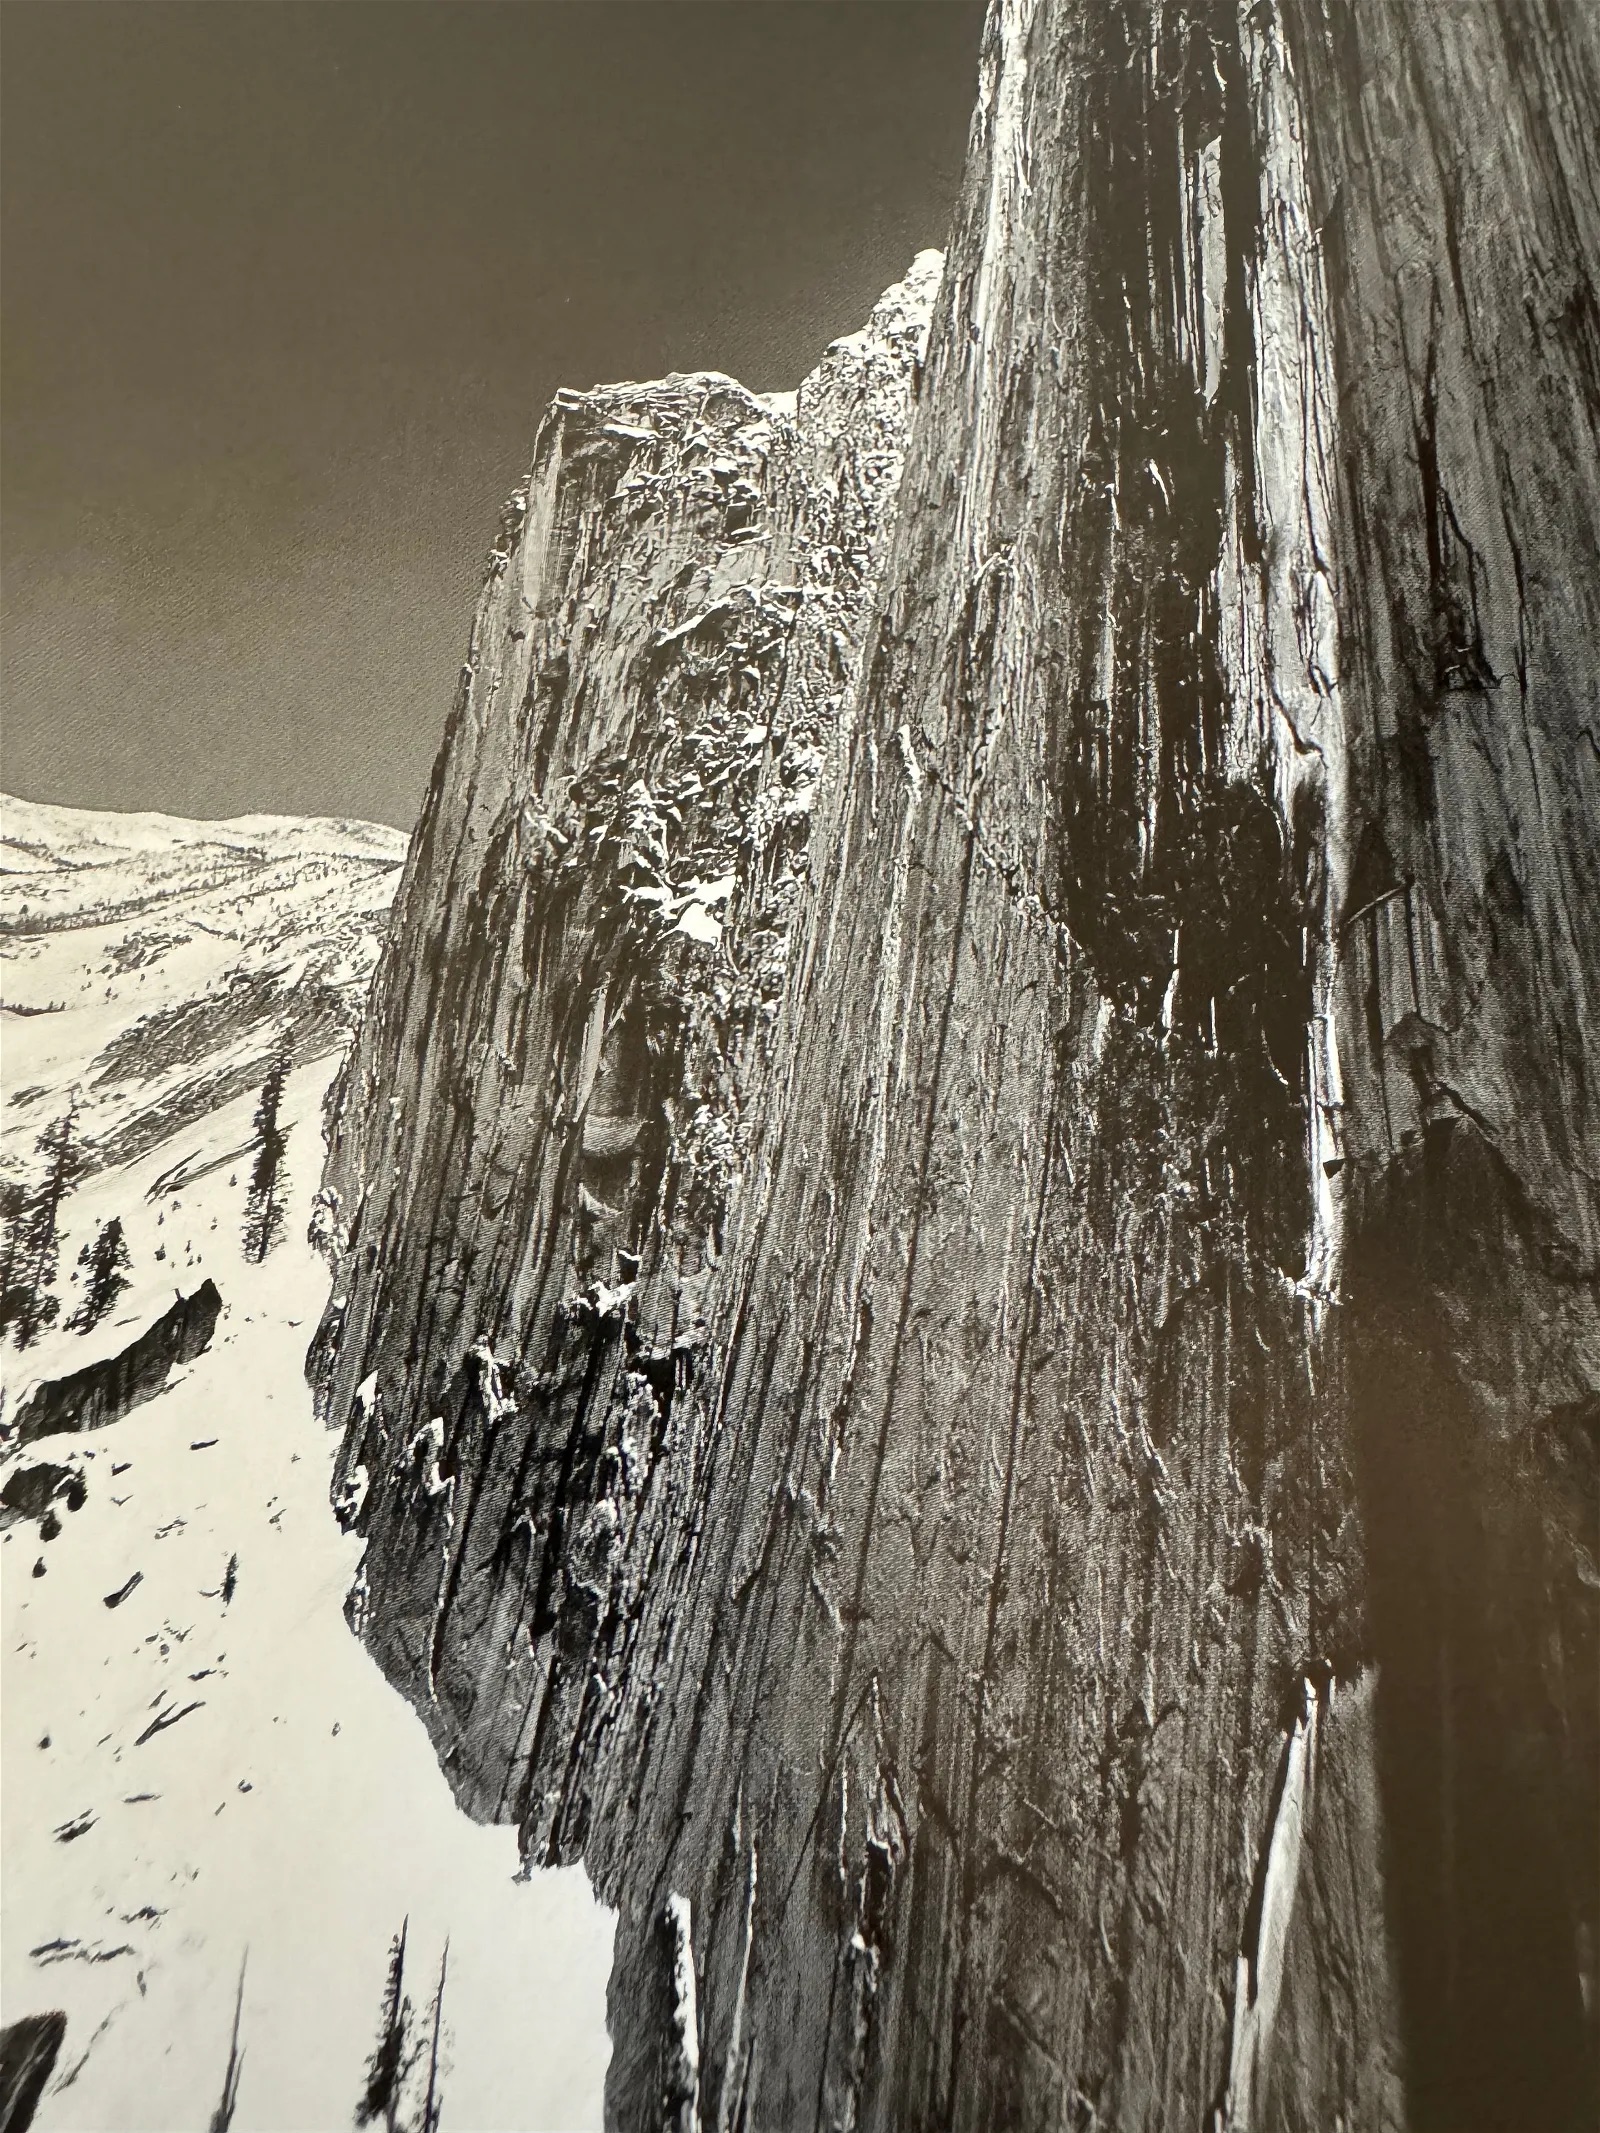 Ansel Adams "Monolith, The Face of the Half Dome, Yosemite Valley, 1927" Print - Image 4 of 5